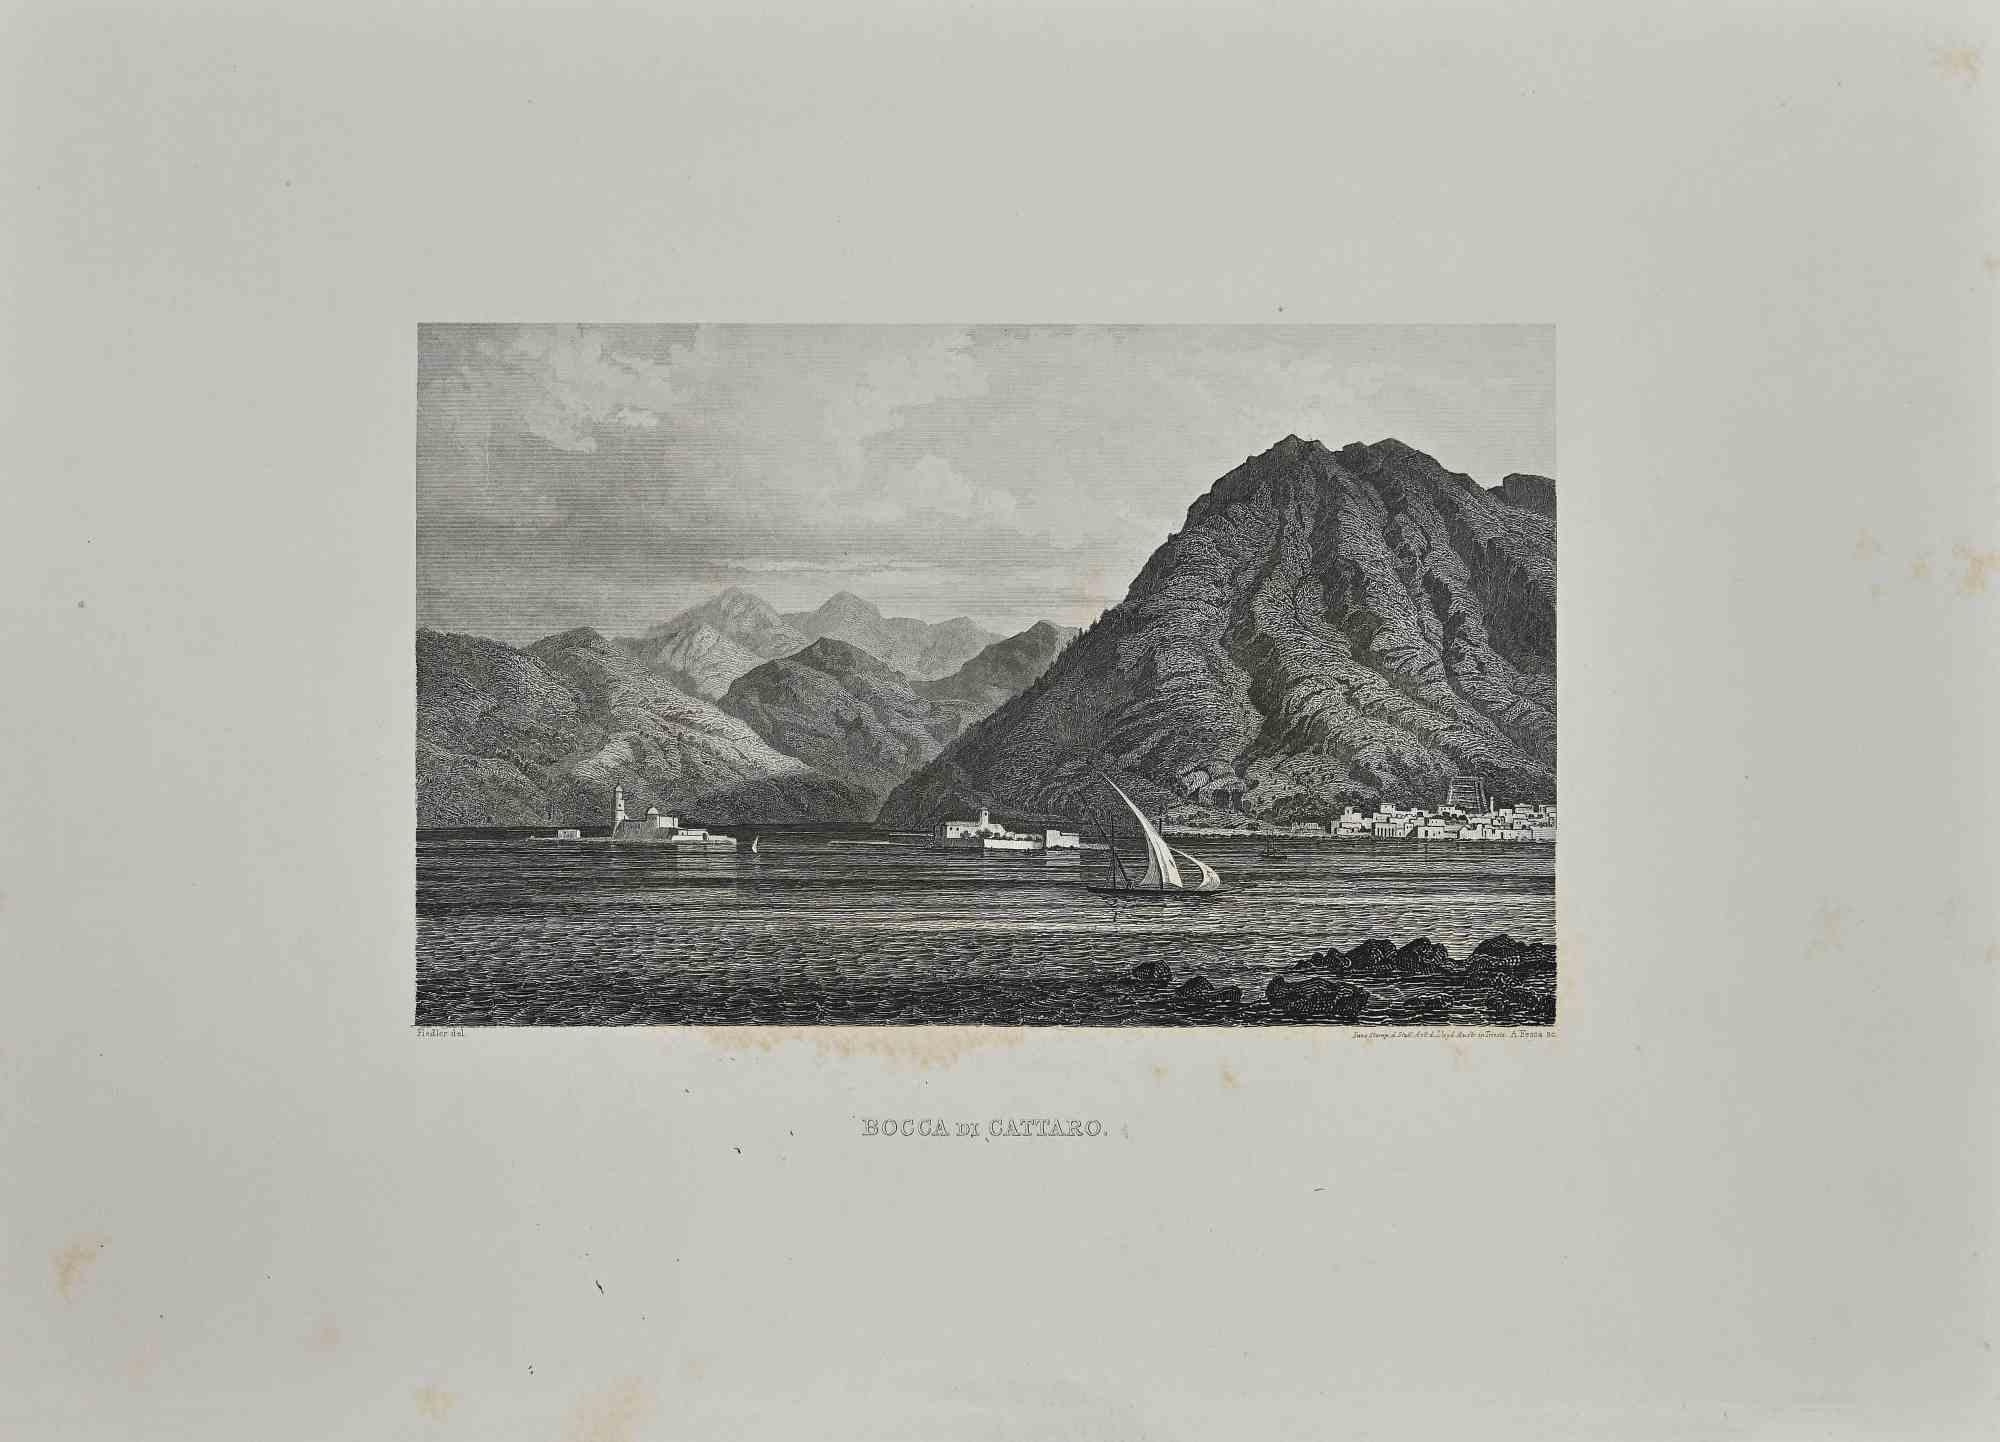 August Anton Tischbein Abstract Print - Ancient View of Bocca - Original Lithograph By A. A. Tischbein - 19th Century